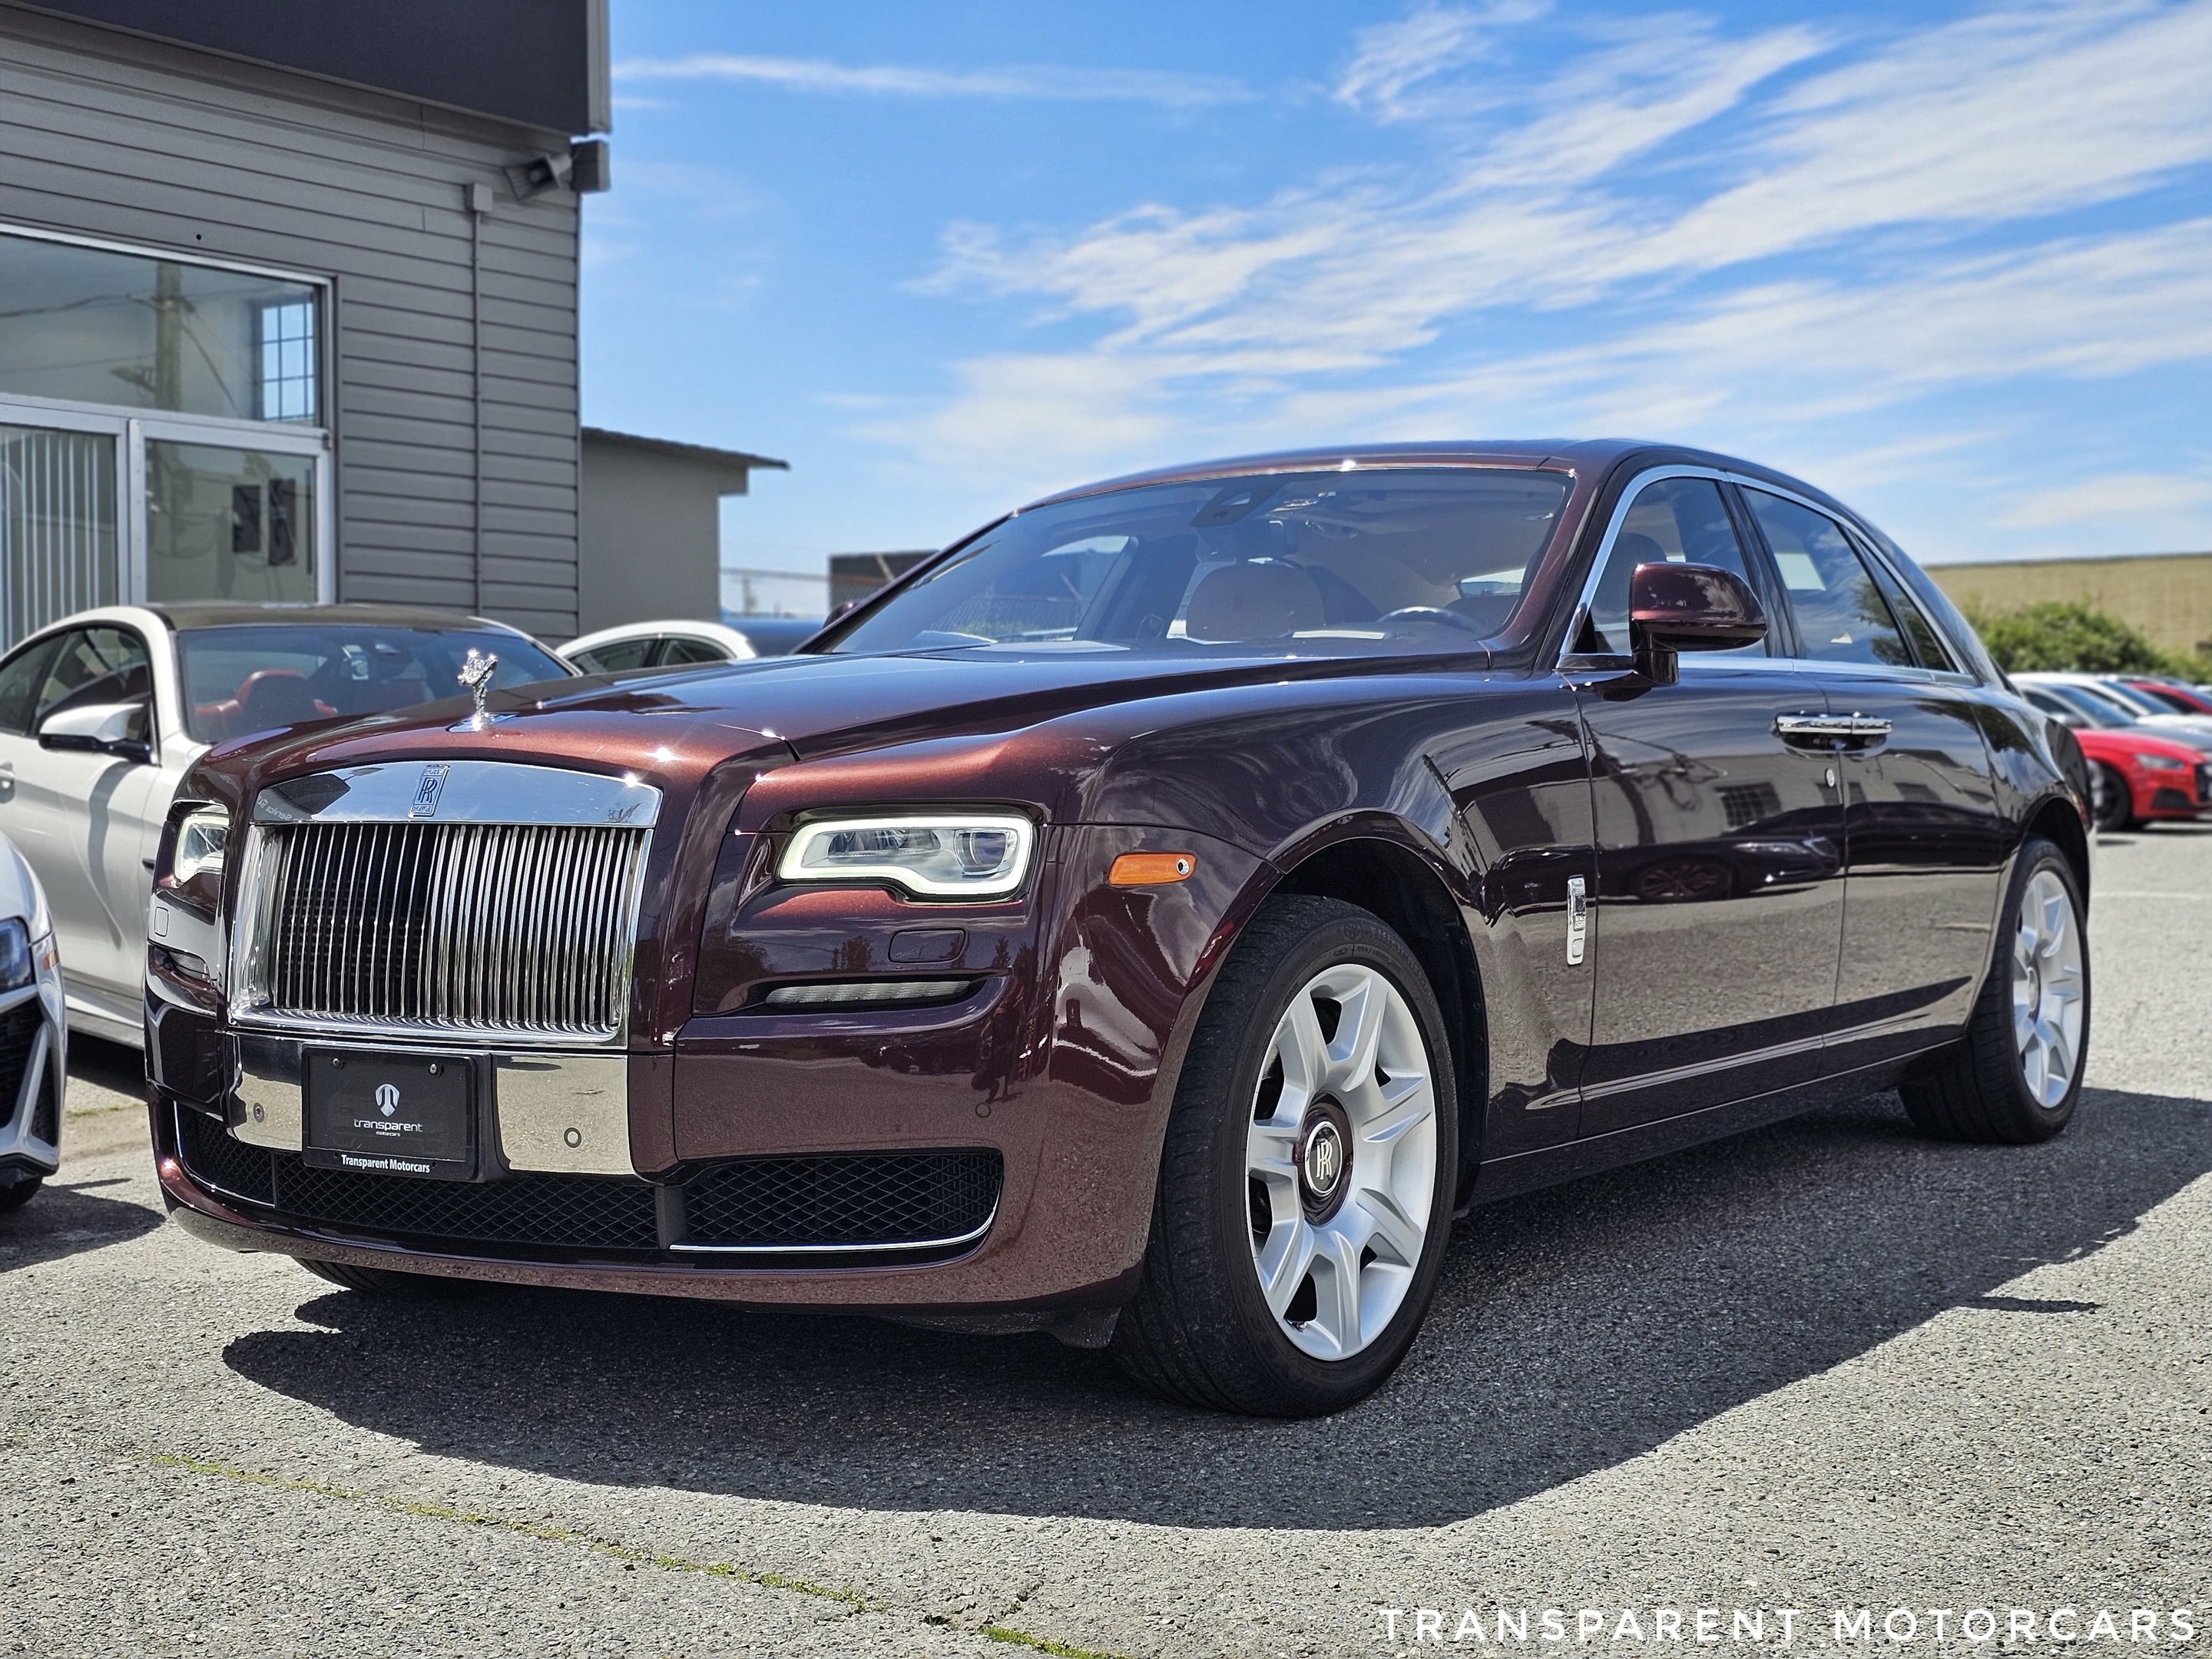 2015 Rolls-Royce Ghost Clean Carfax/V12 563 HP/Driver Assist/Massage/Vent